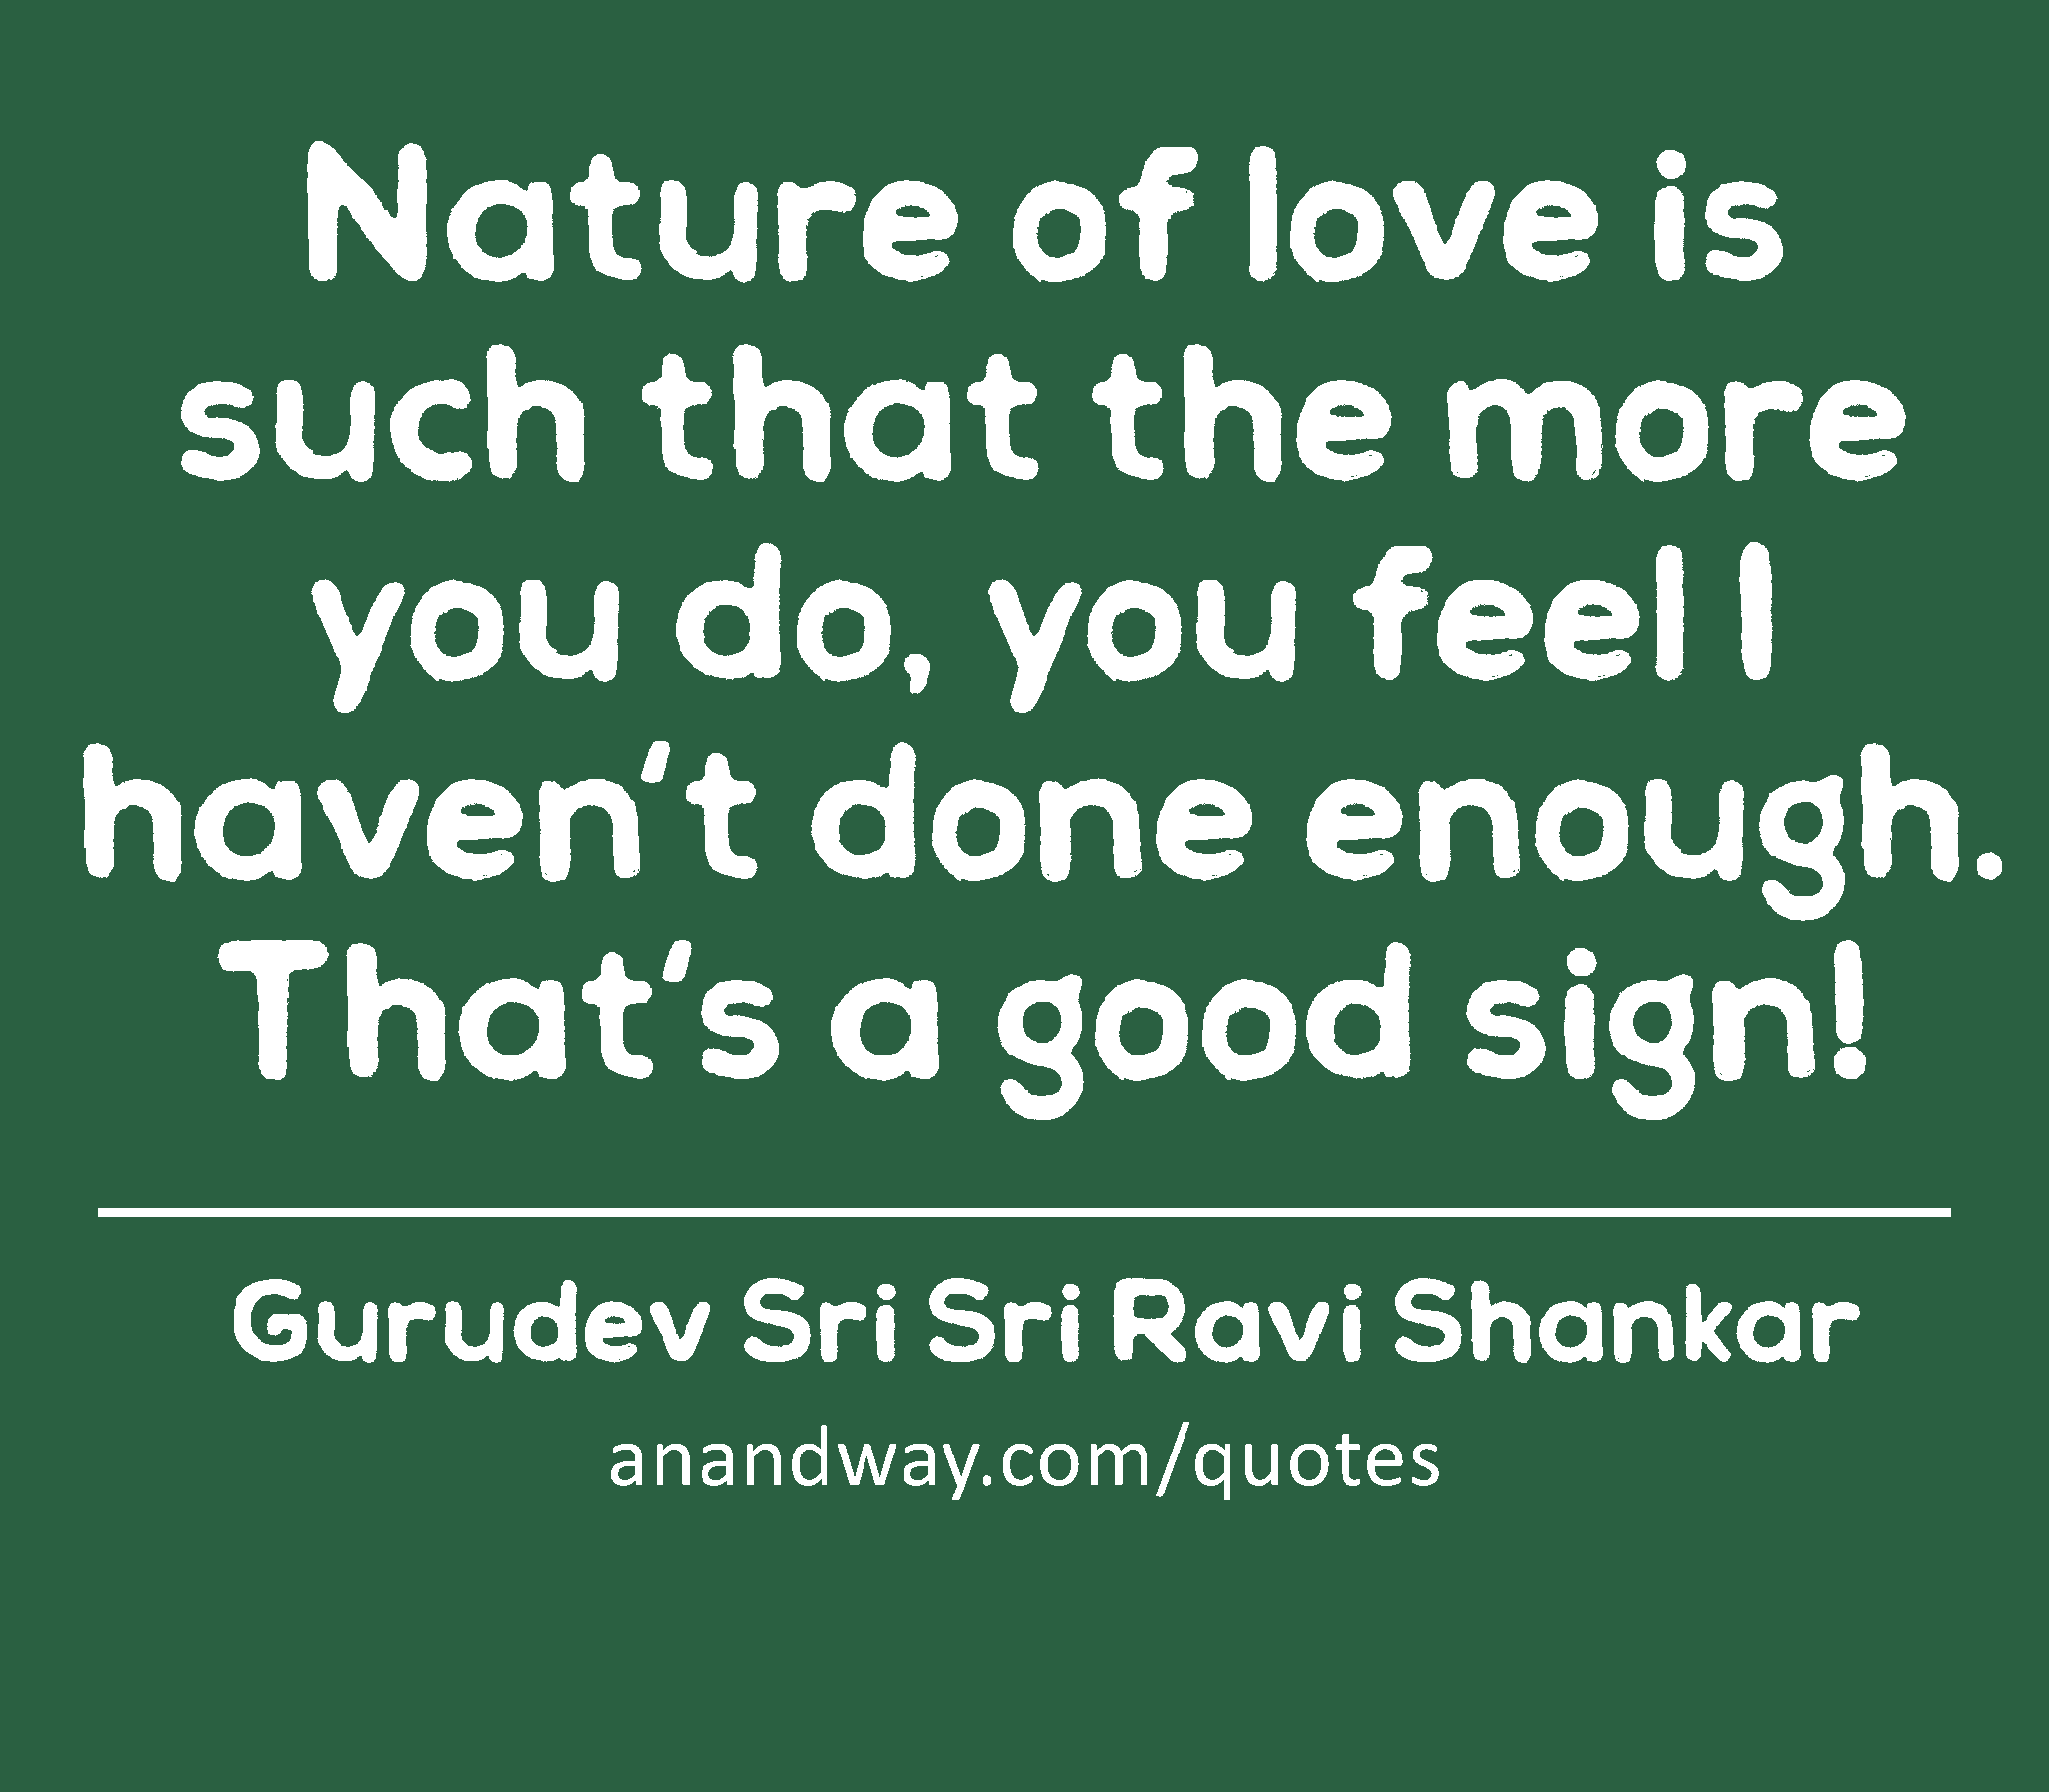 Nature of love is such that the more you do, you feel I haven't done enough. That's a good sign! 
 -Gurudev Sri Sri Ravi Shankar